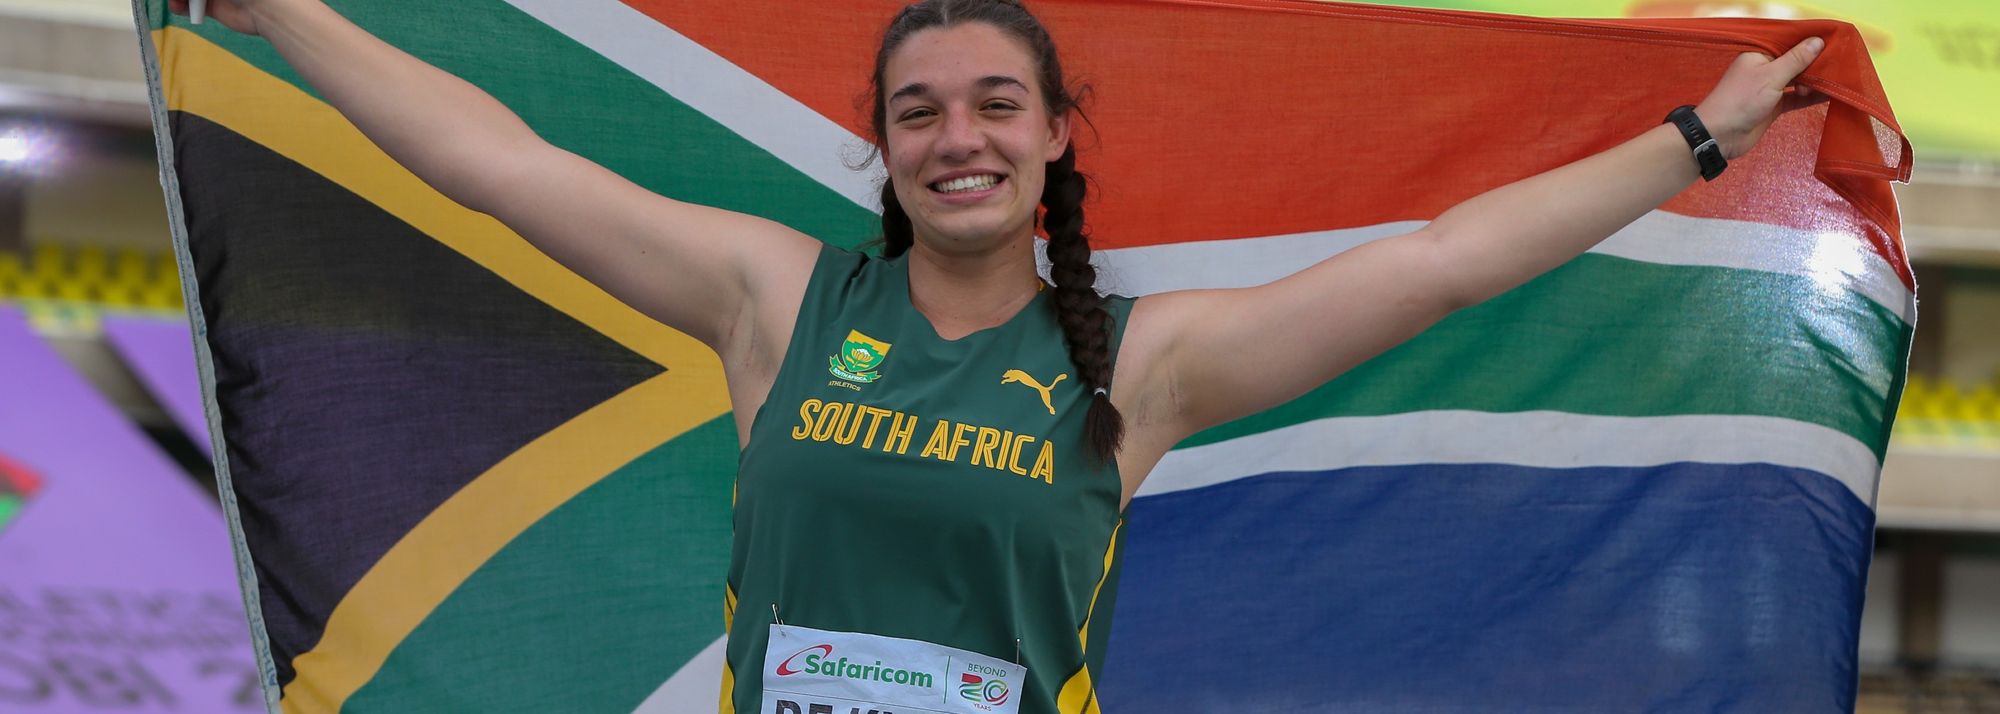 South Africa’s Mine De Klerk sealed a sensational medal double with a golden performance in the shot put, while Yonathan Kapitolnik made history once again for Israel.